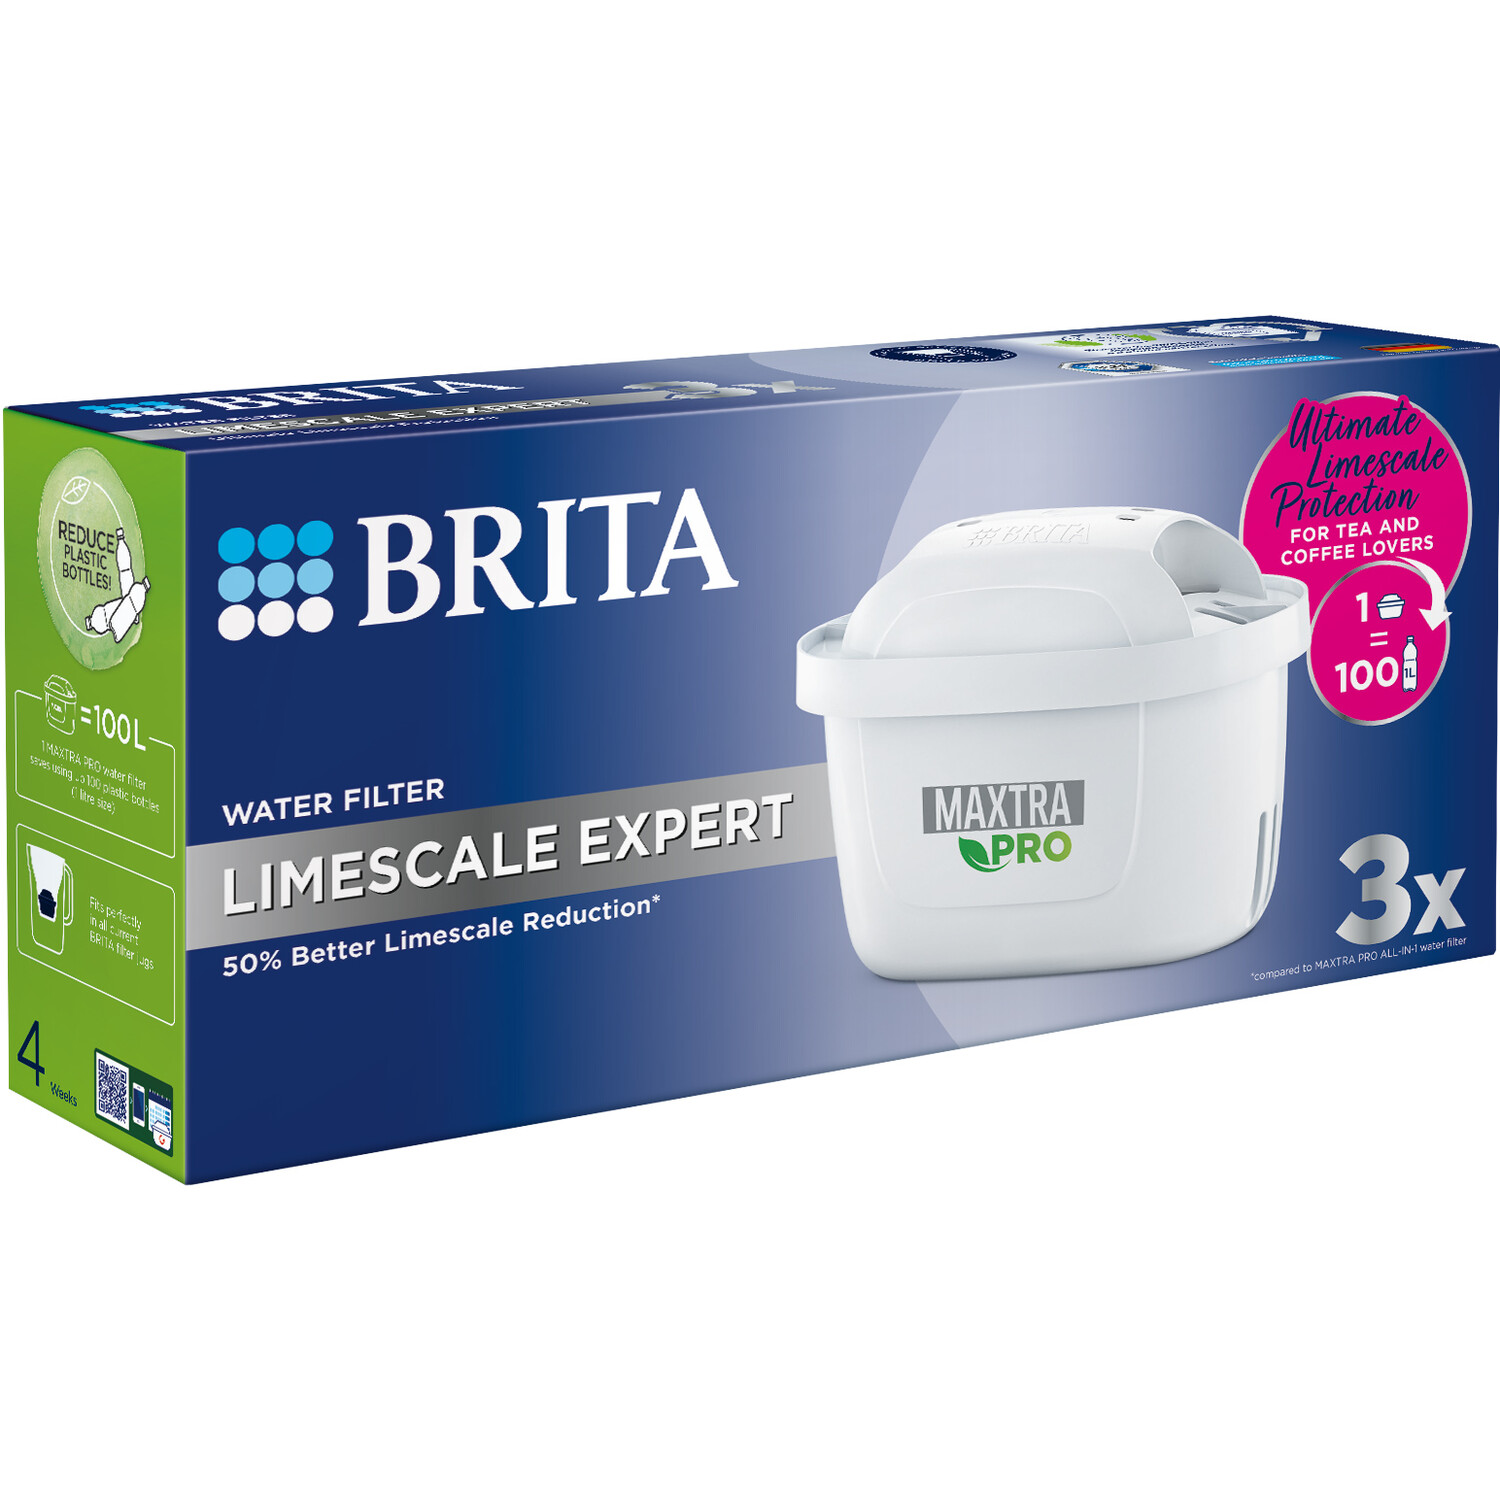 Pack of 3 BRITA MAXTRA Pro Limescale Expert Water Filters - White